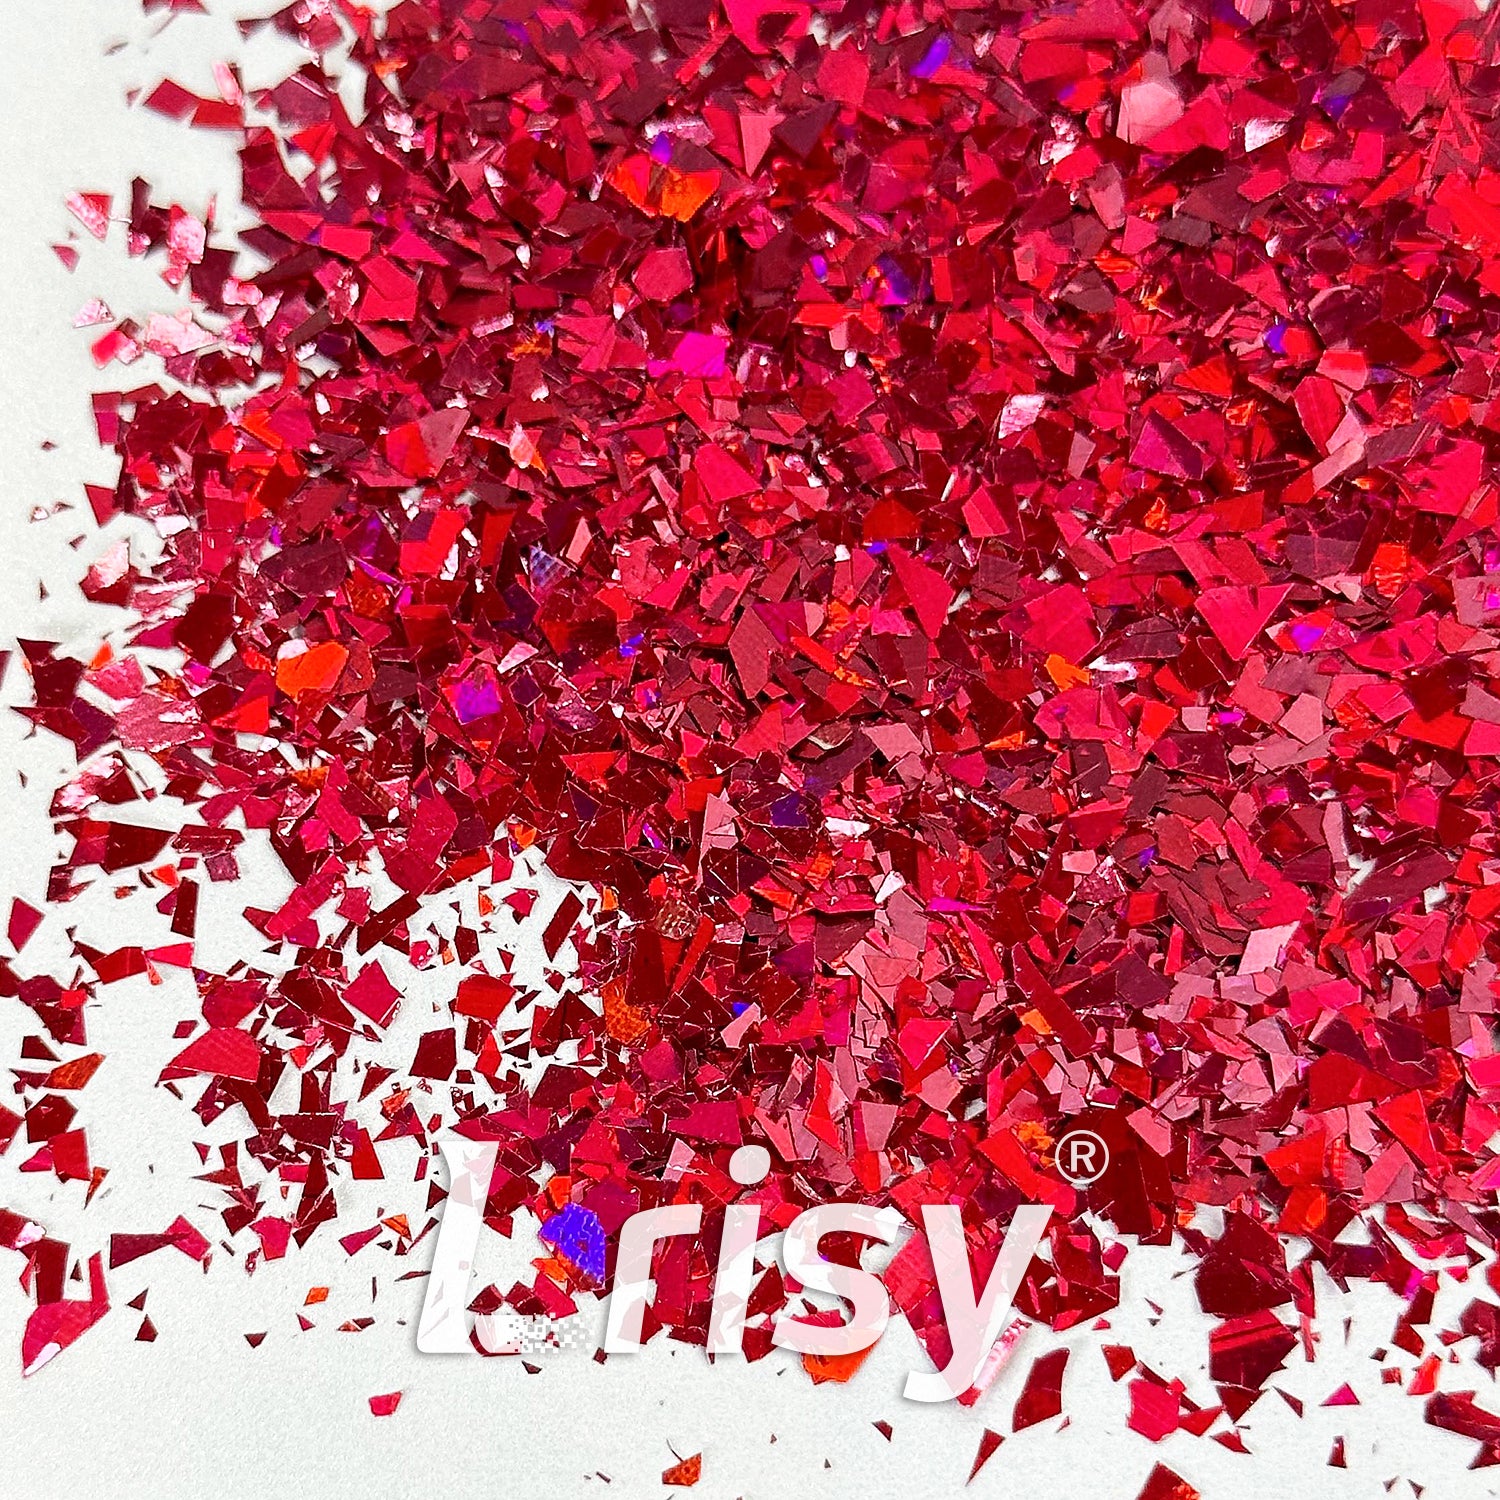 Holographic Rose Red Cellophane Glitter Flakes Holo Shards LB0912 4x4